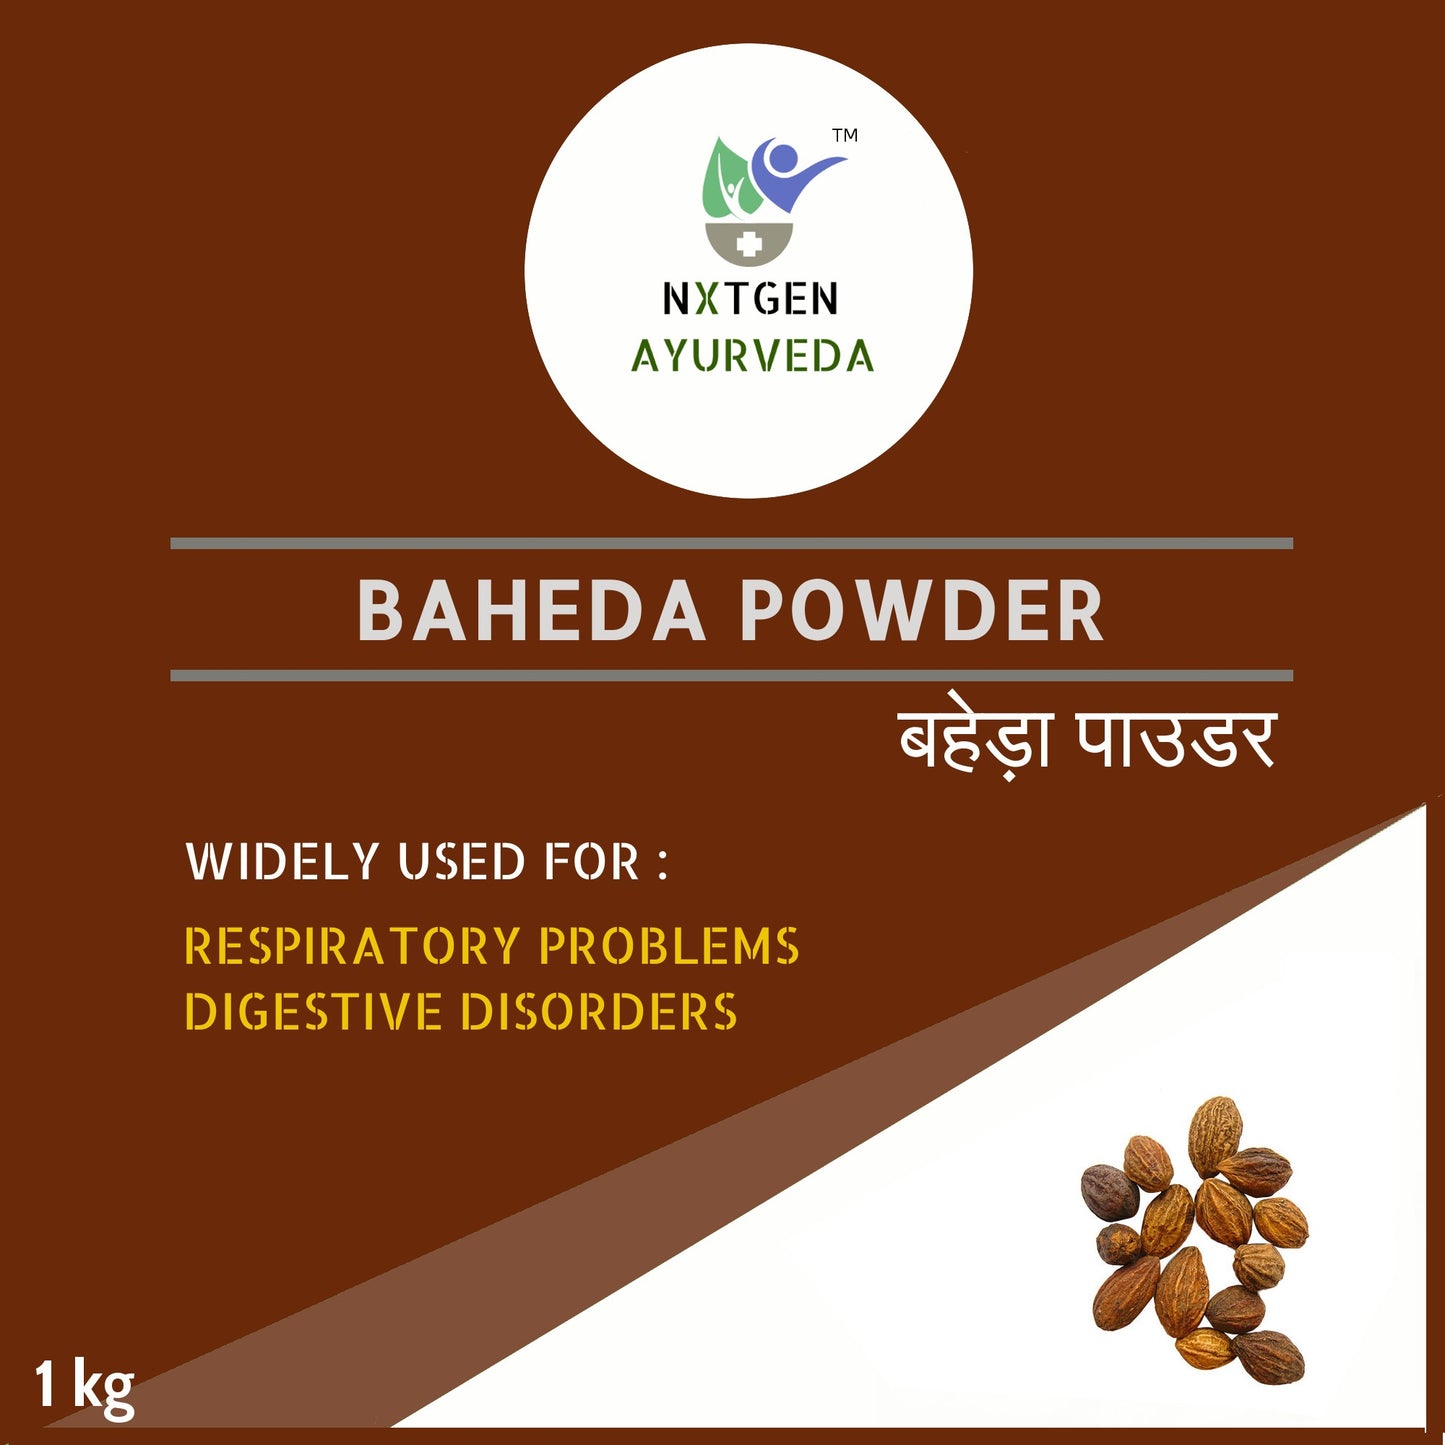 In addition to its antioxidant and anti-inflammatory properties, baheda powder is also believed to have a number of other health benefits.